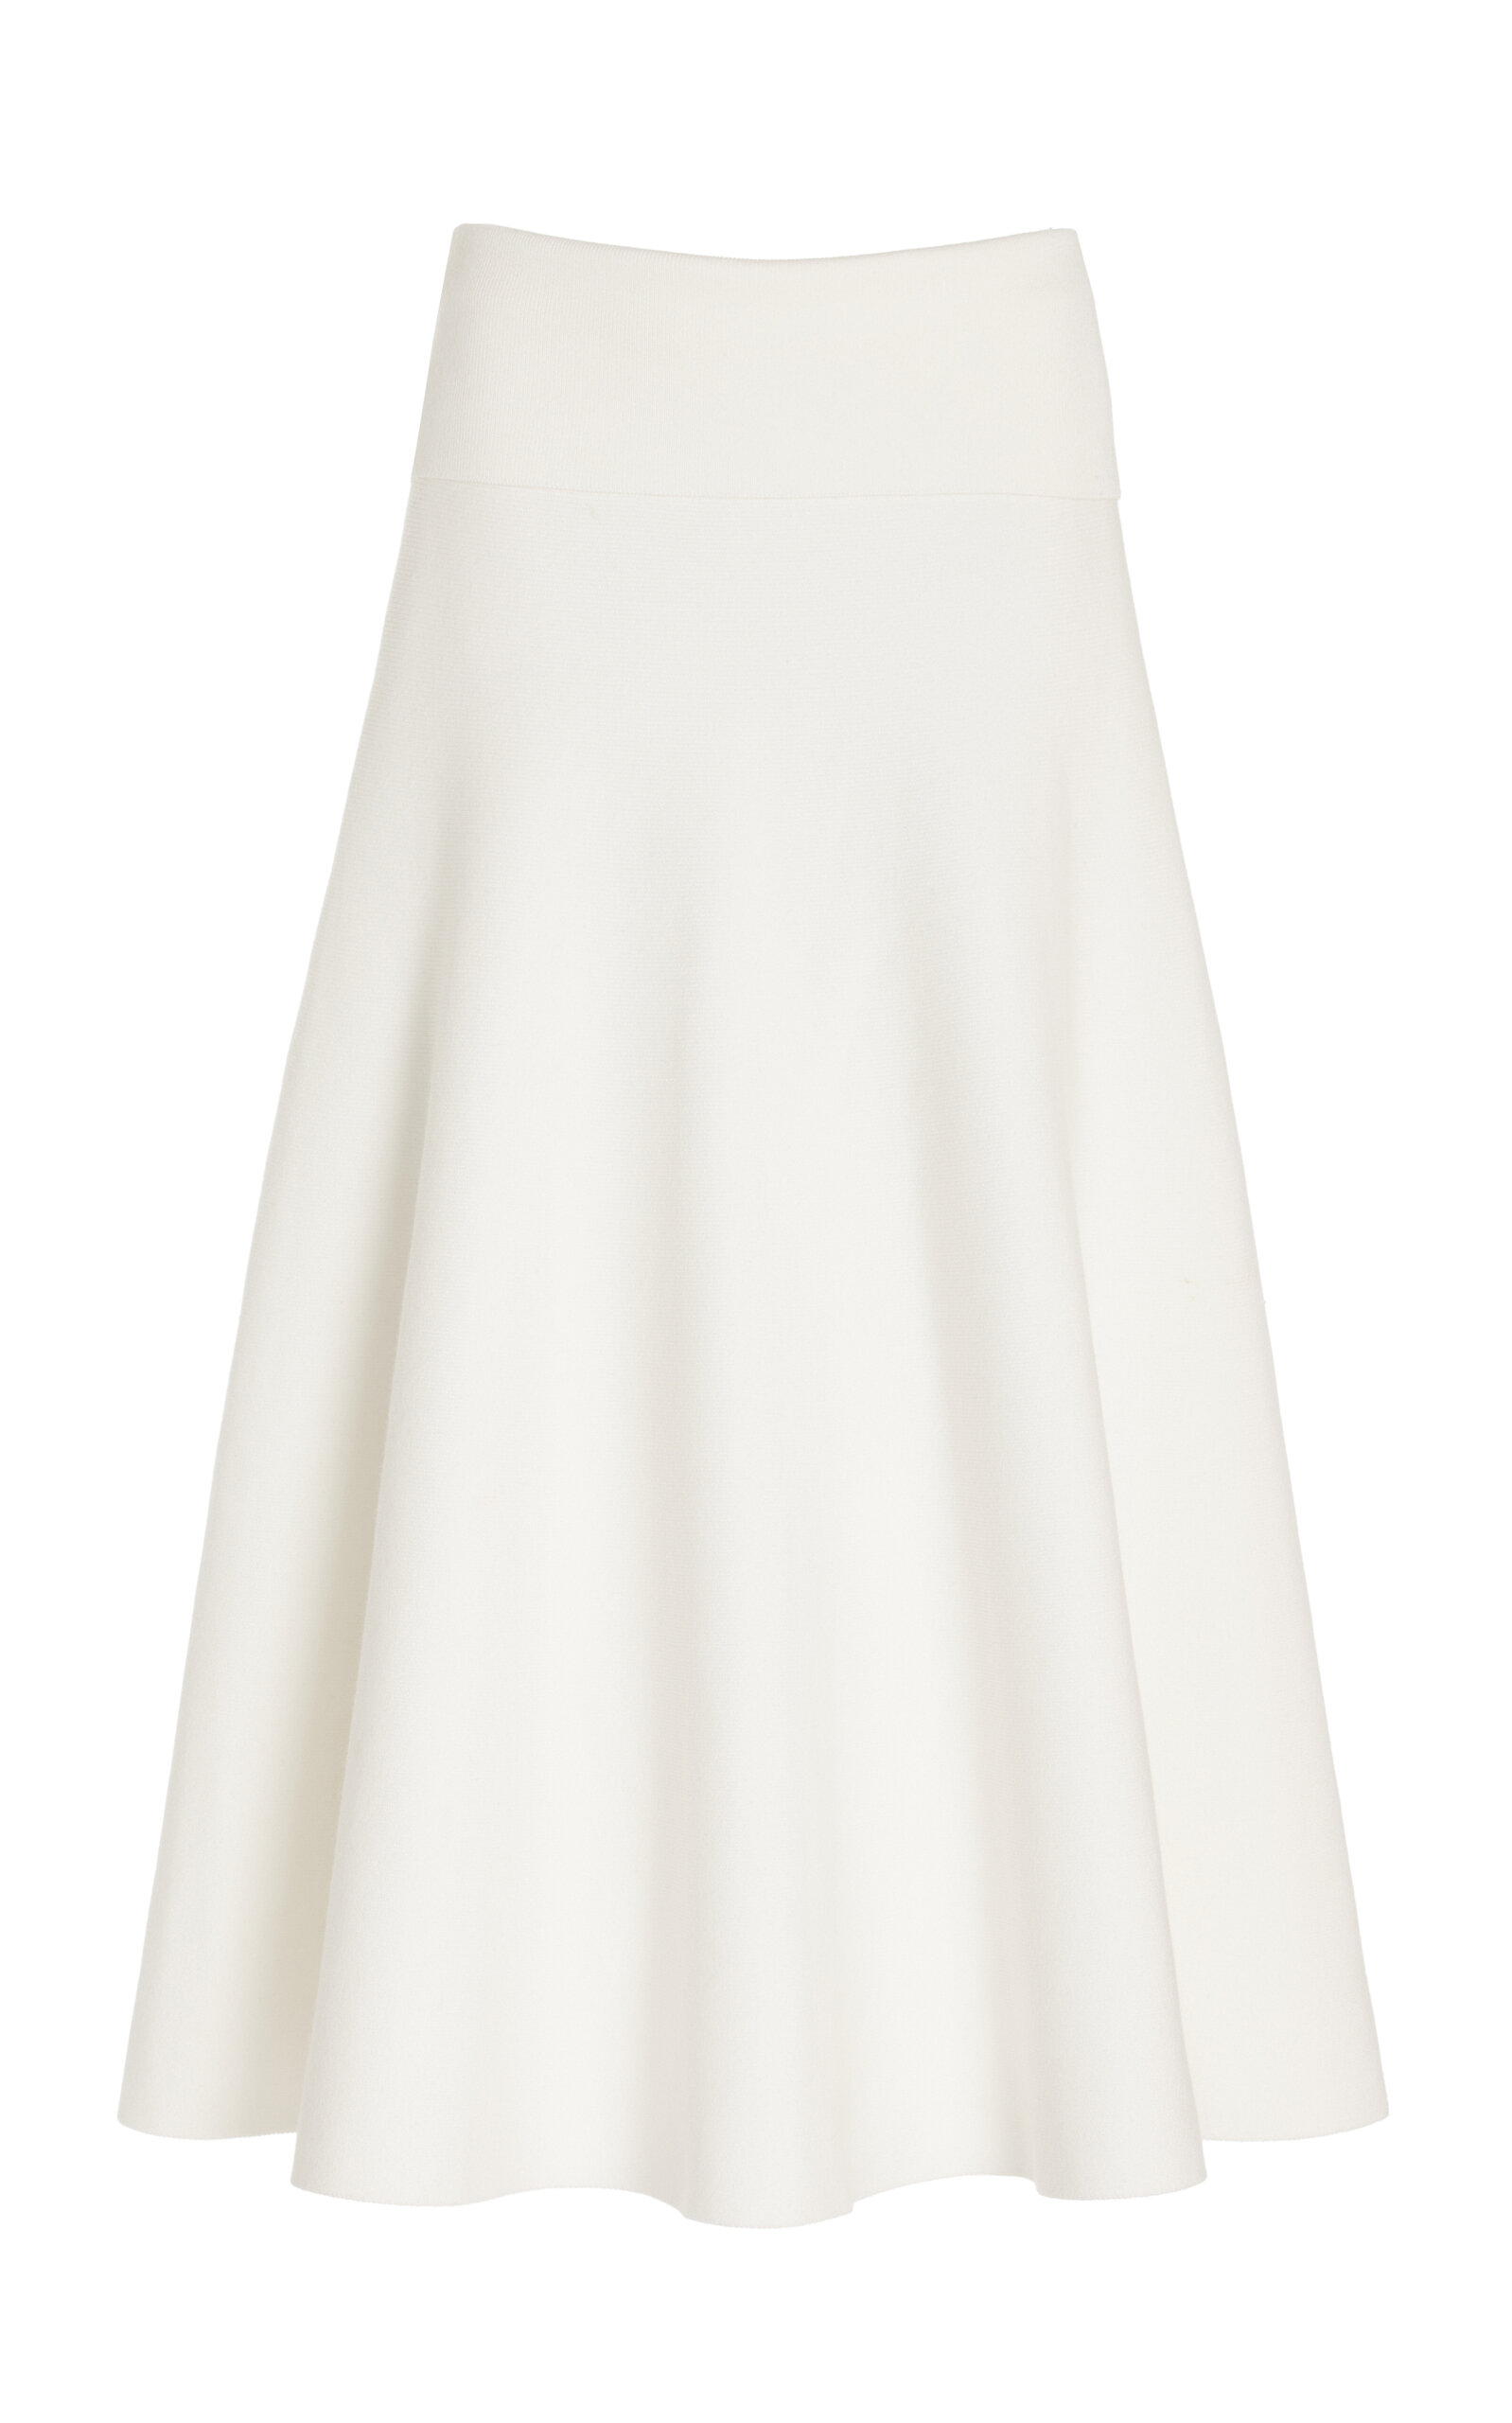 The Frankie Shop Exclusive Gabrielle Knit Midi Skirt In White